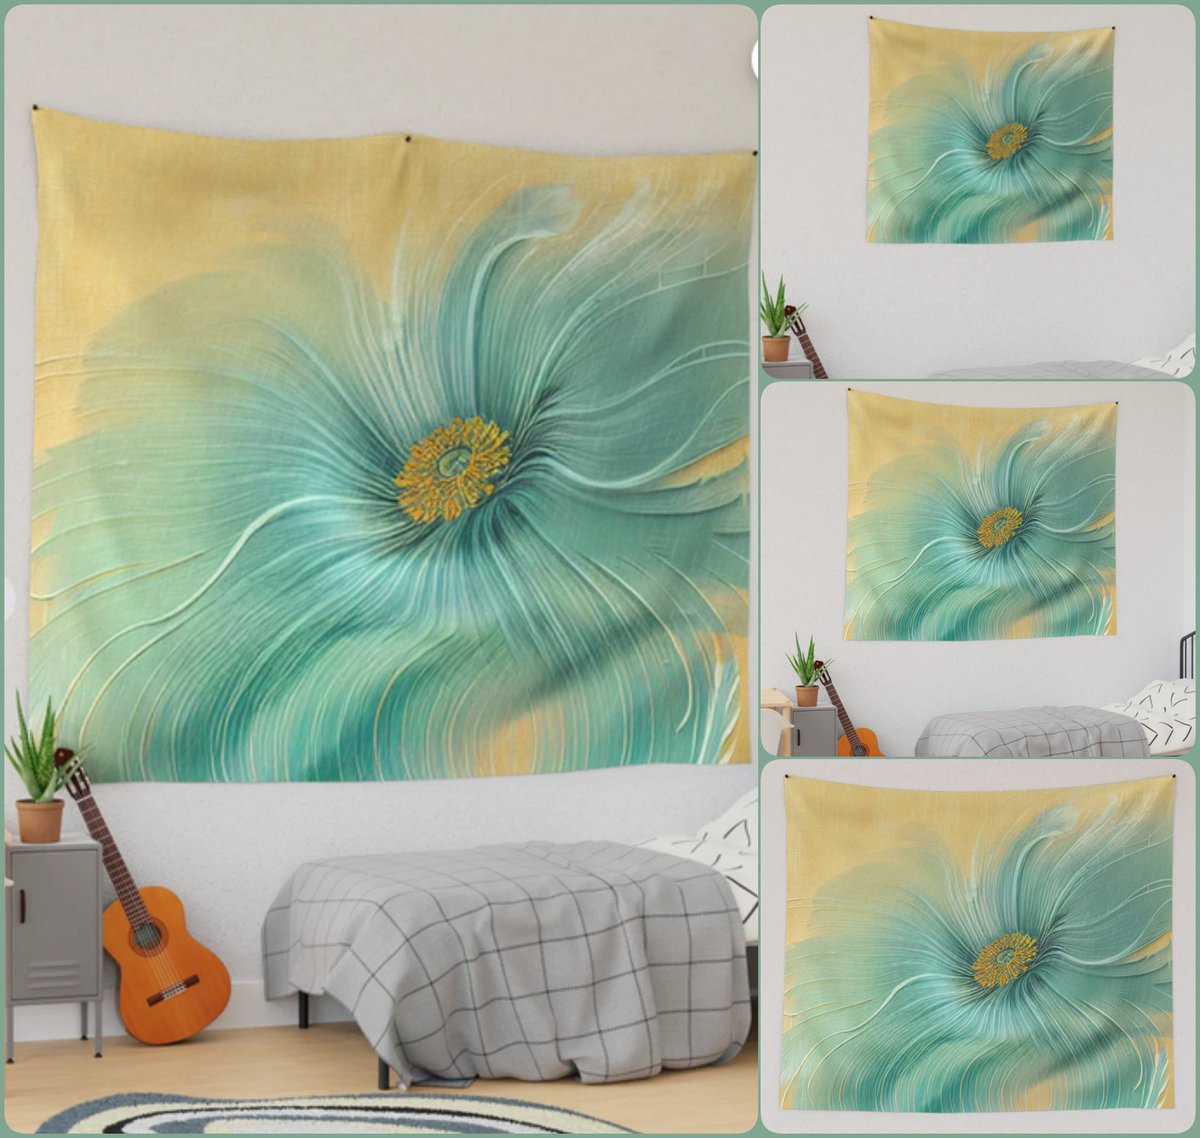 *SALE 25% Off* Discovering Quiet Tapestry~by Art Falaxy~ ~The Art of Uniqueness!~ #accents #wall #art #artfalaxy #canvas #framed #metal #posters #prints #redbubble #tapestry #wood #trendy #modern #FindYourThing redbubble.com/i/tapestry/Dis… Collection: redbubble.com/shop/ap/159402…